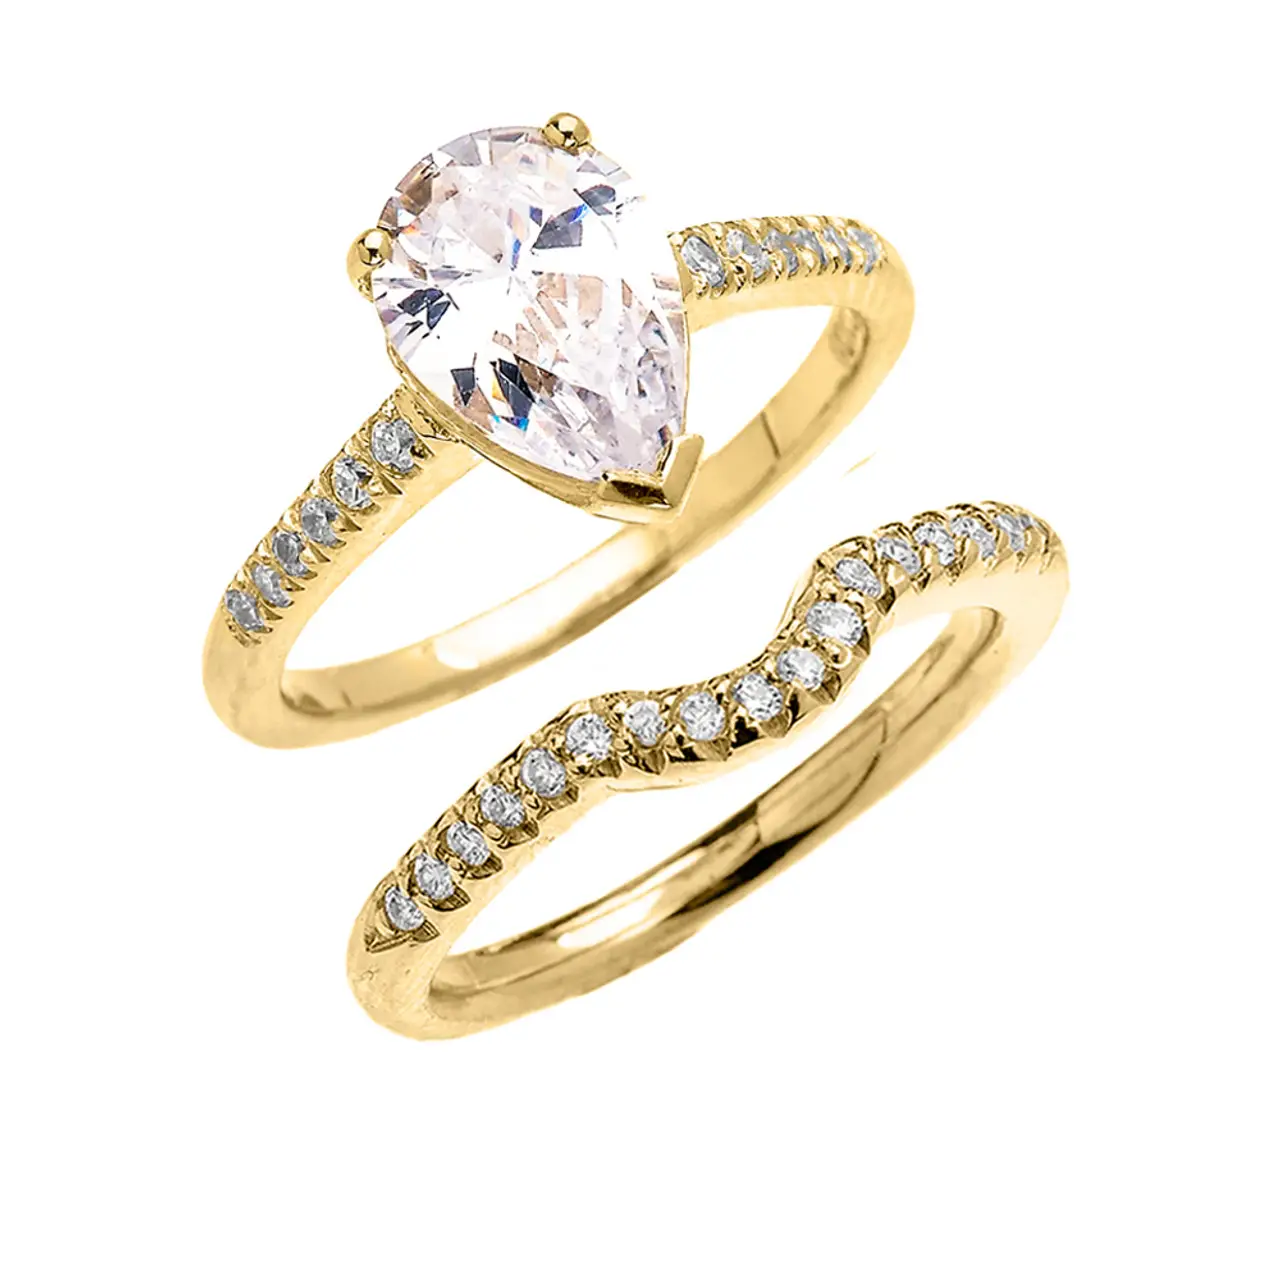 Yellow Gold Dainty Pear Shape Cubic Zirconia Solitaire Wedding Ring Set